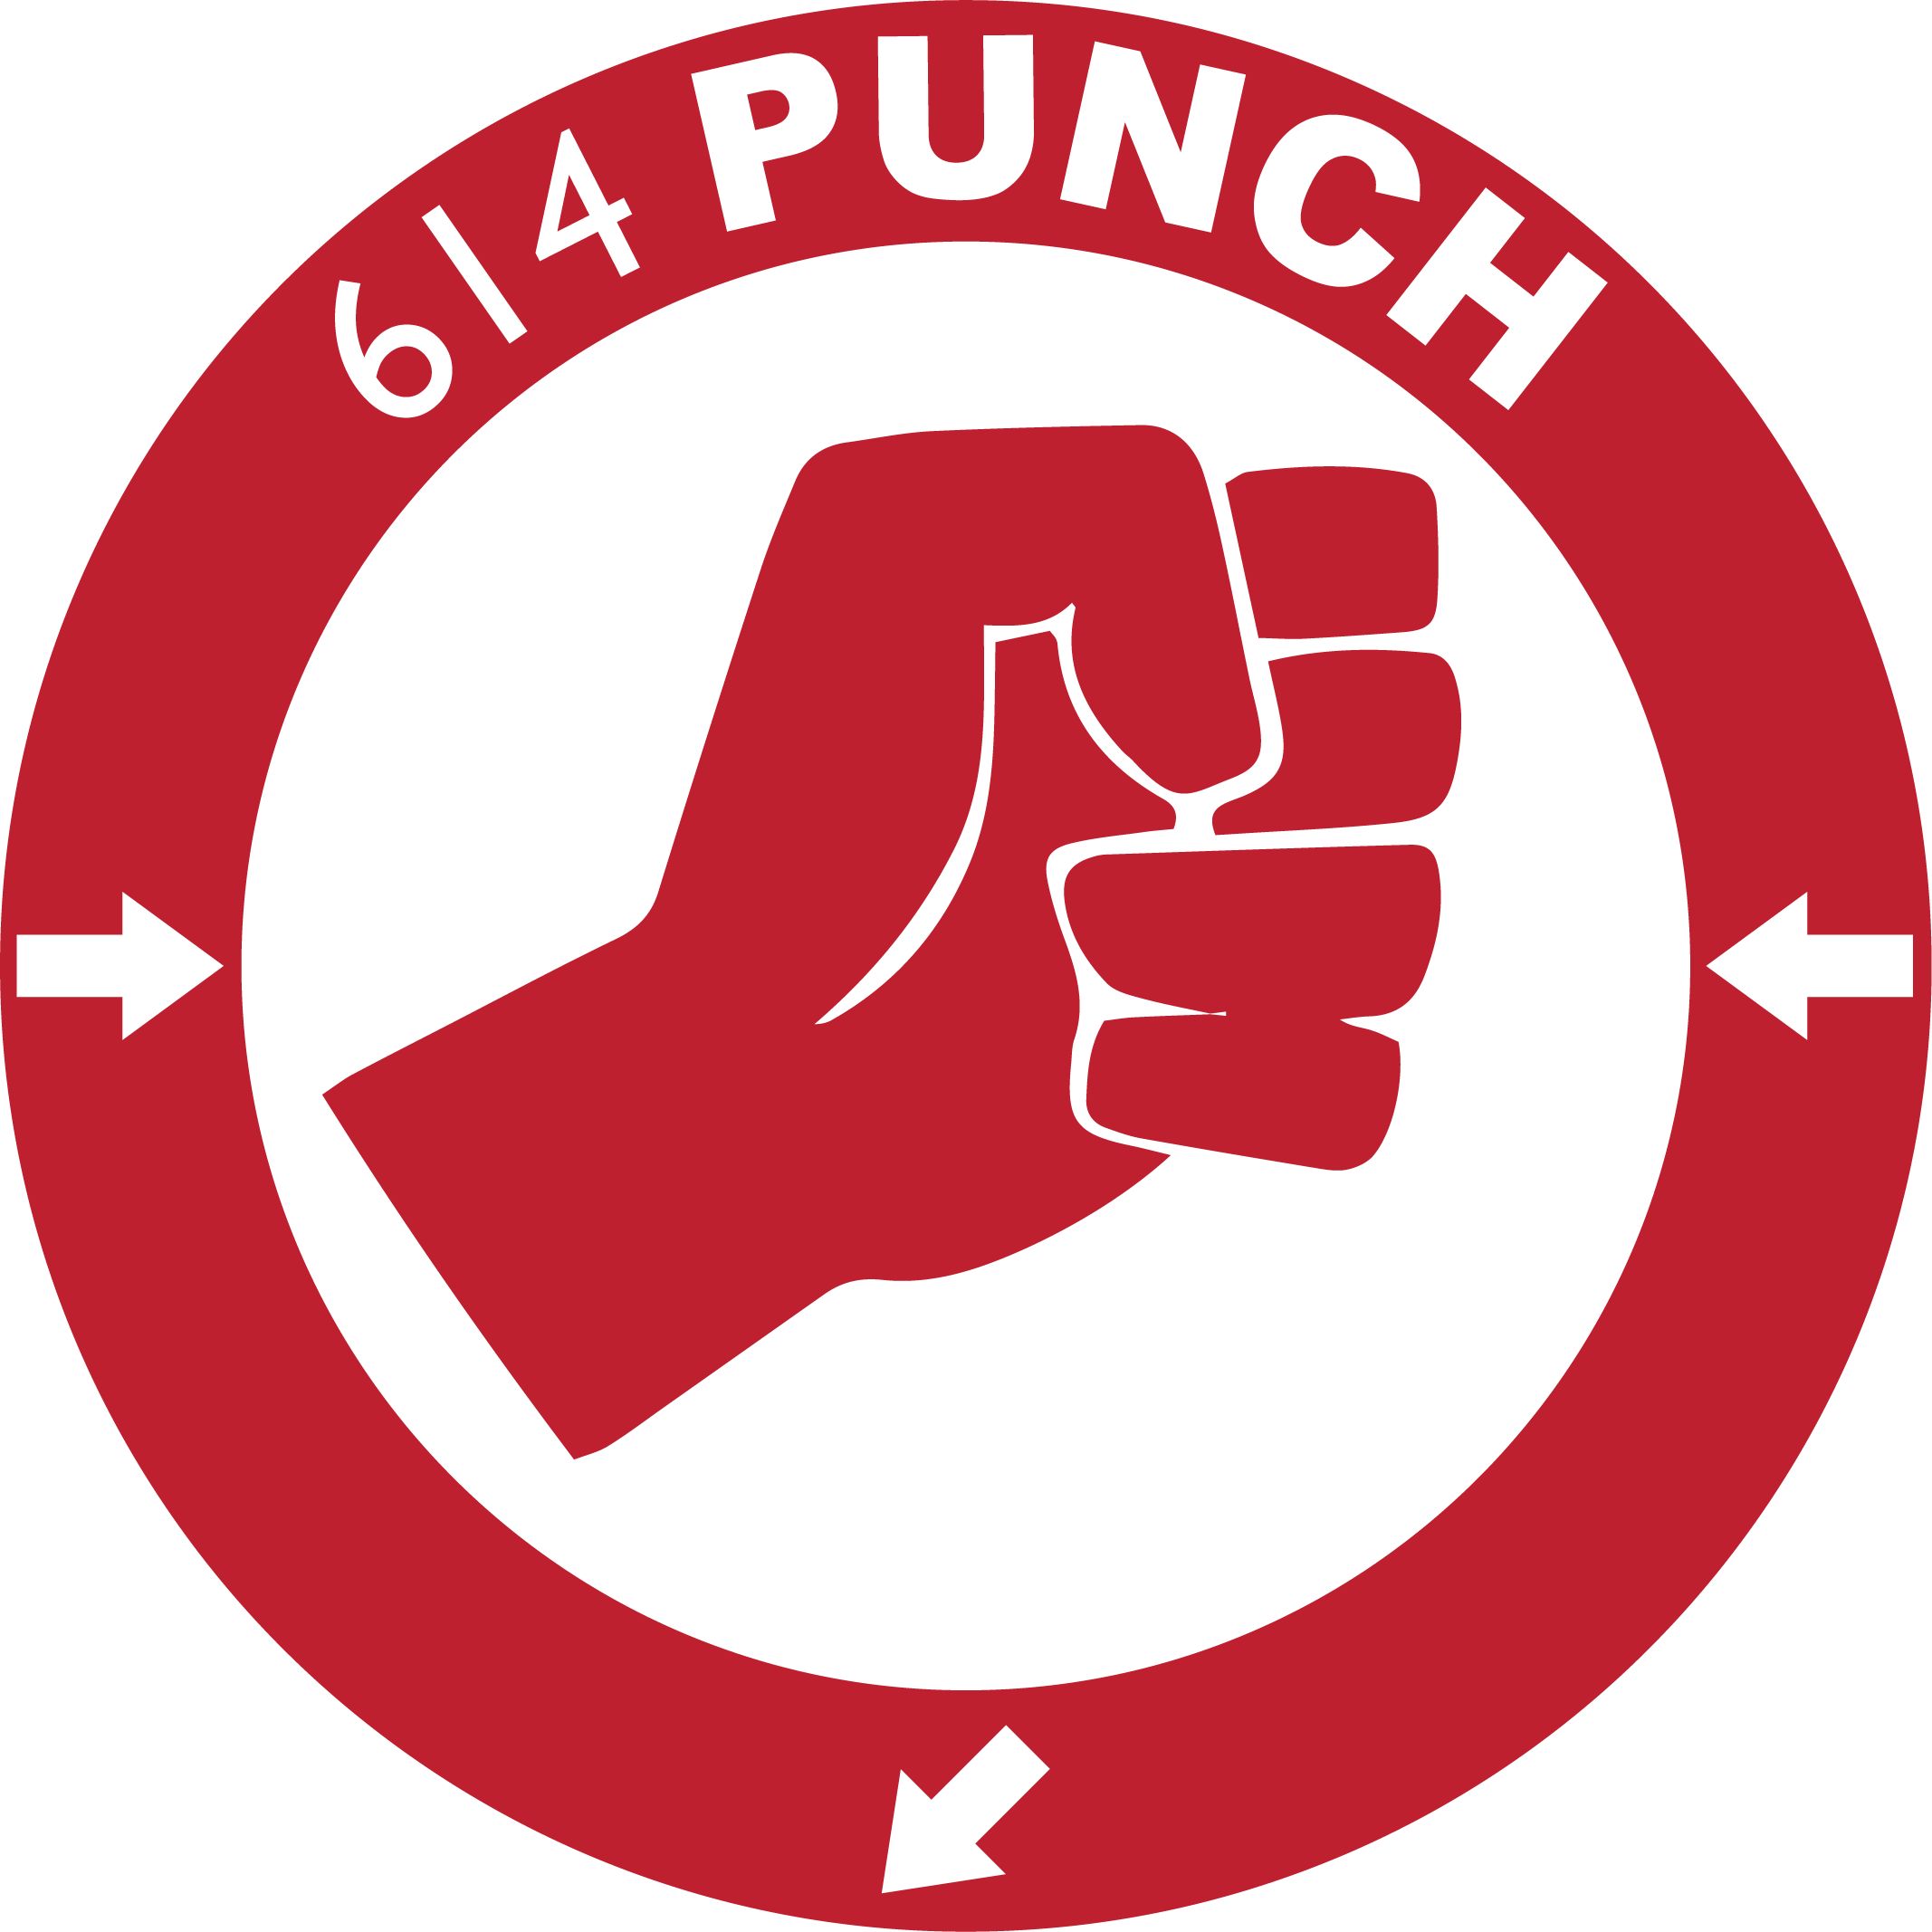 614 Punch Episode 9 - Compy905